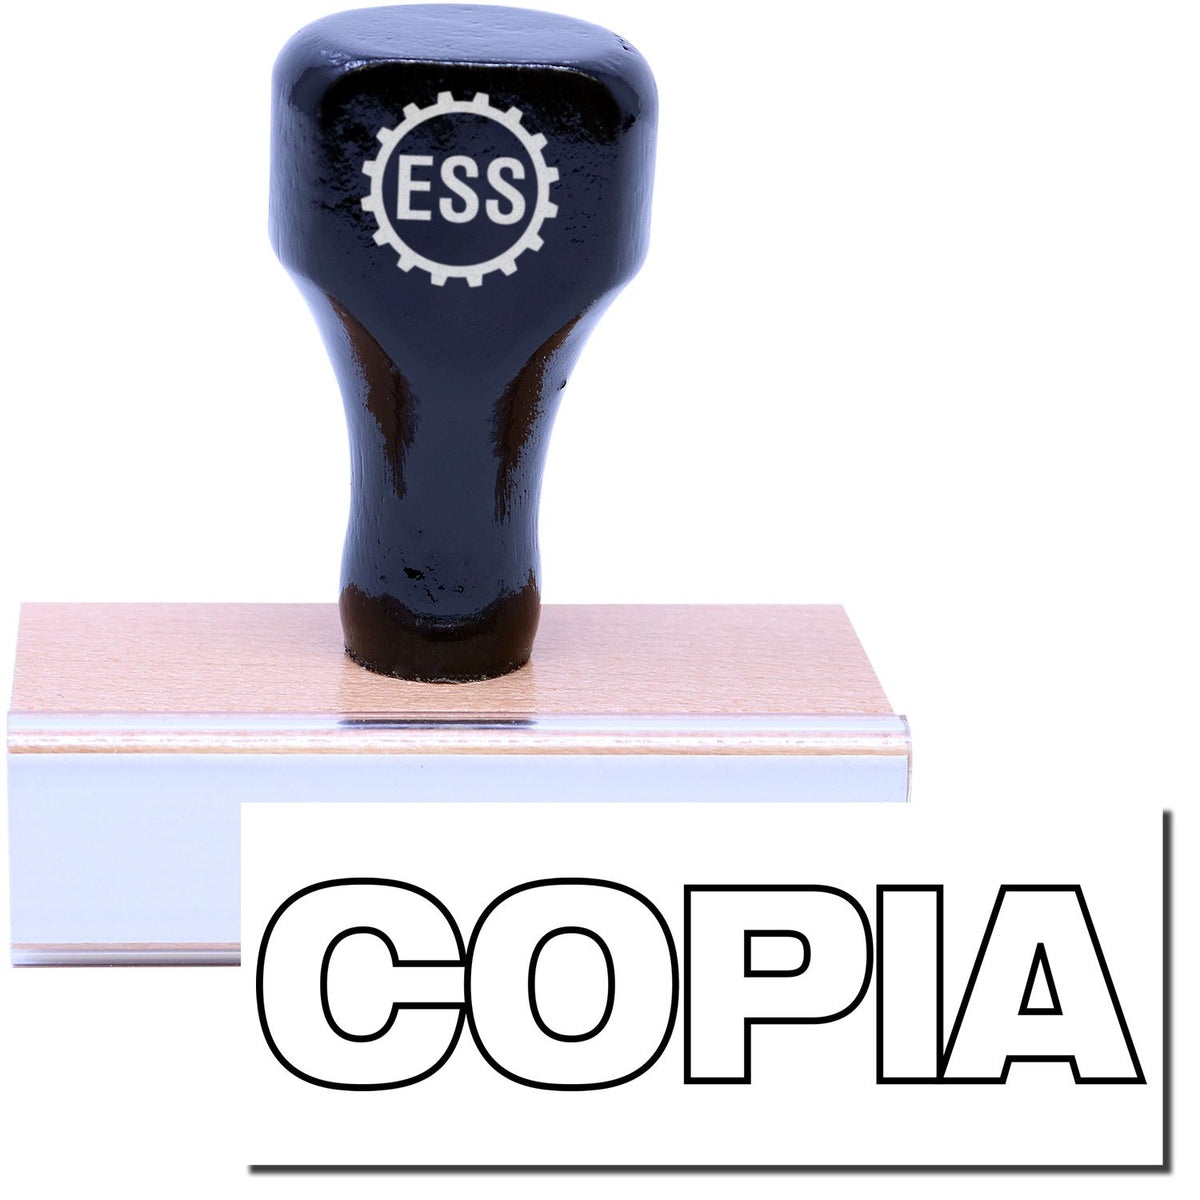 A stock office rubber stamp with a stamped image showing how the text &quot;COPIA&quot; in an outline font is displayed after stamping.